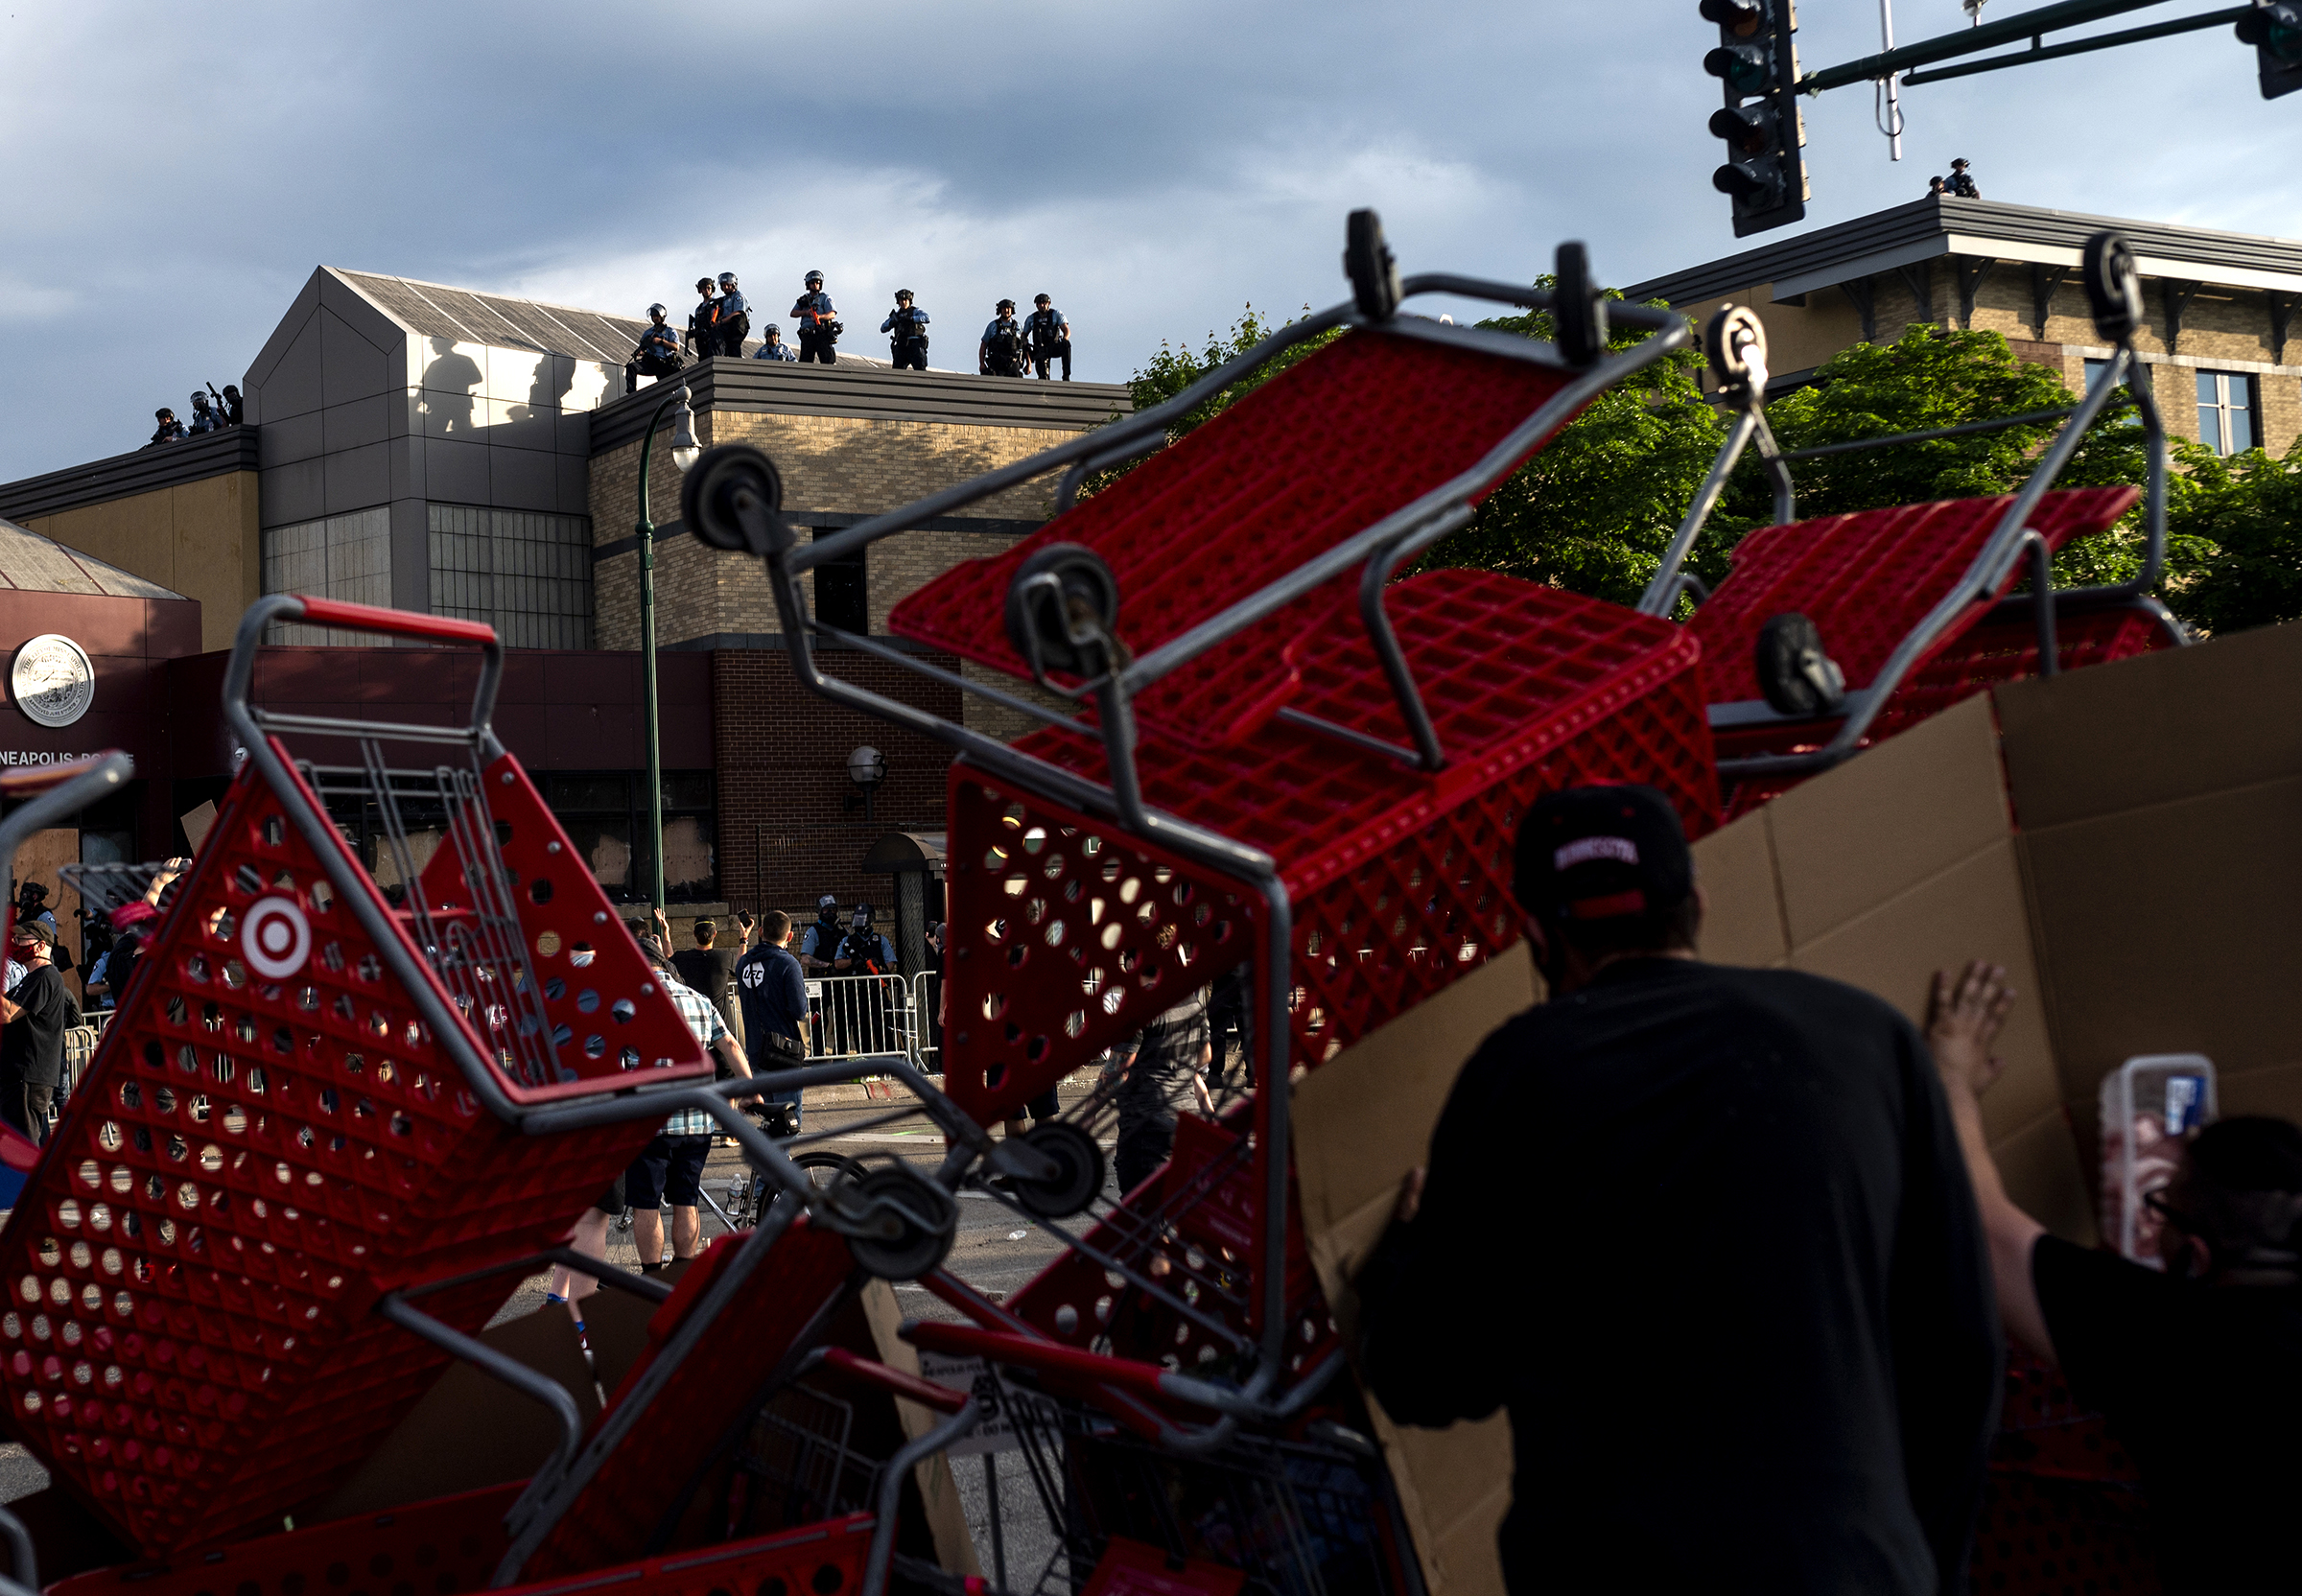 Protesters use shopping carts as a barricade as they confront police near the 3rd precinct on May 27. (Stephen Maturen—Getty Images)